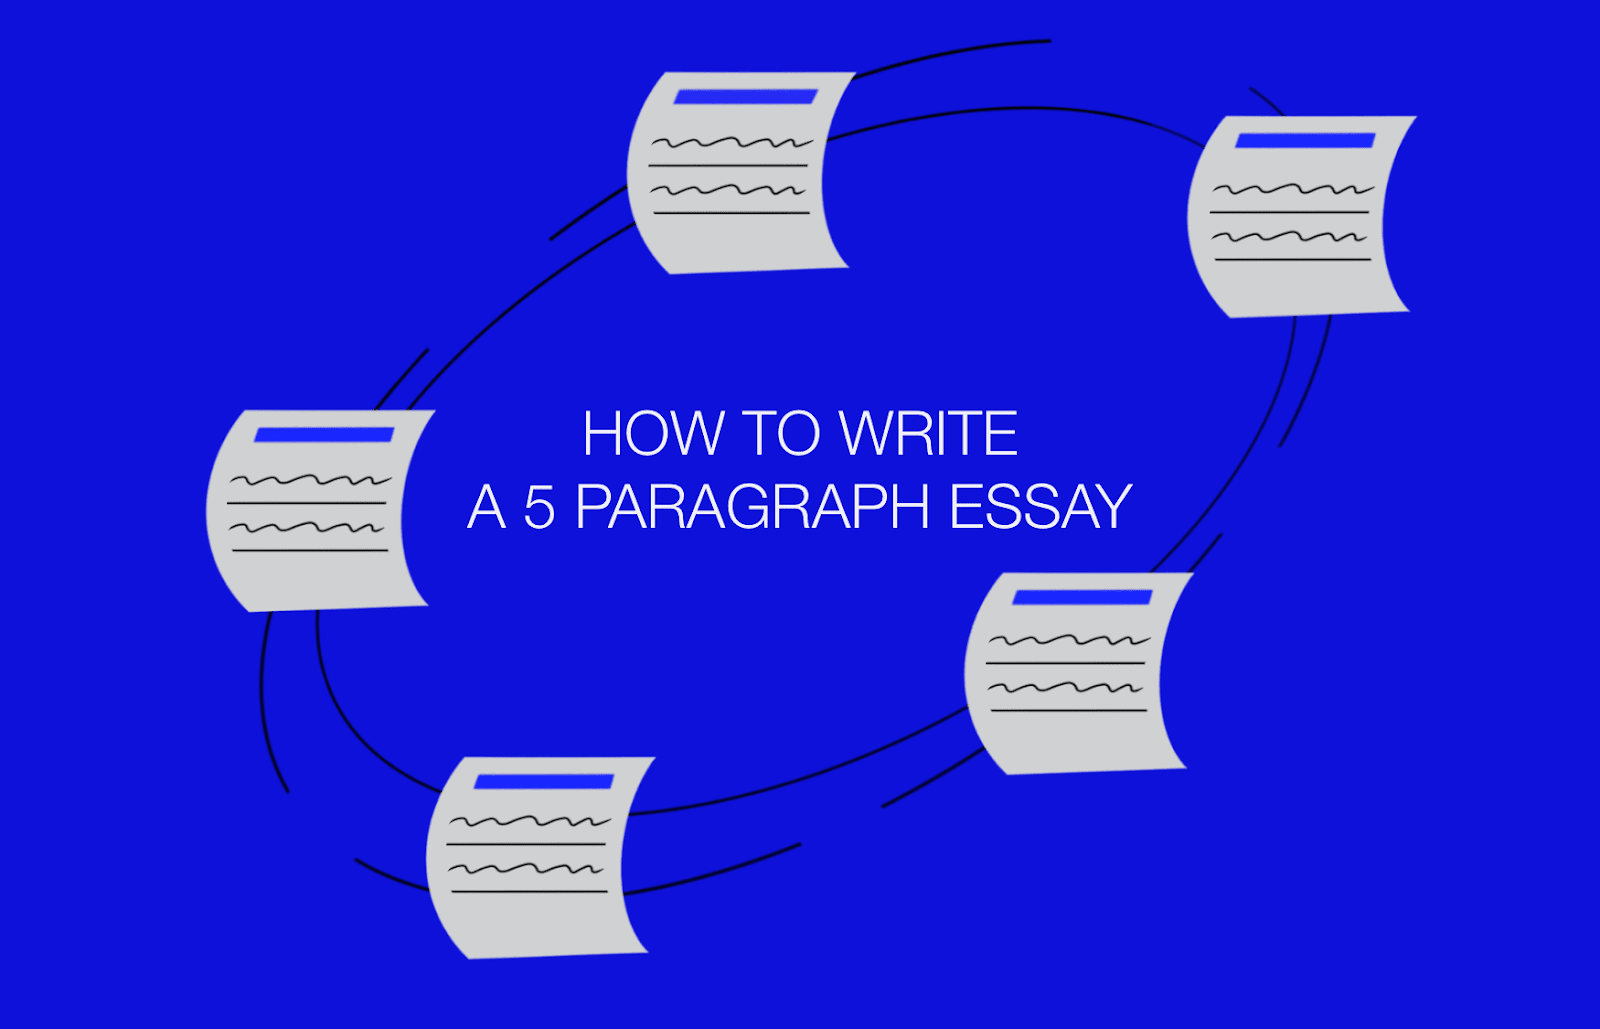 5 Paragraph Essay: Guide, Topics, Outline, Examples | EssayPro